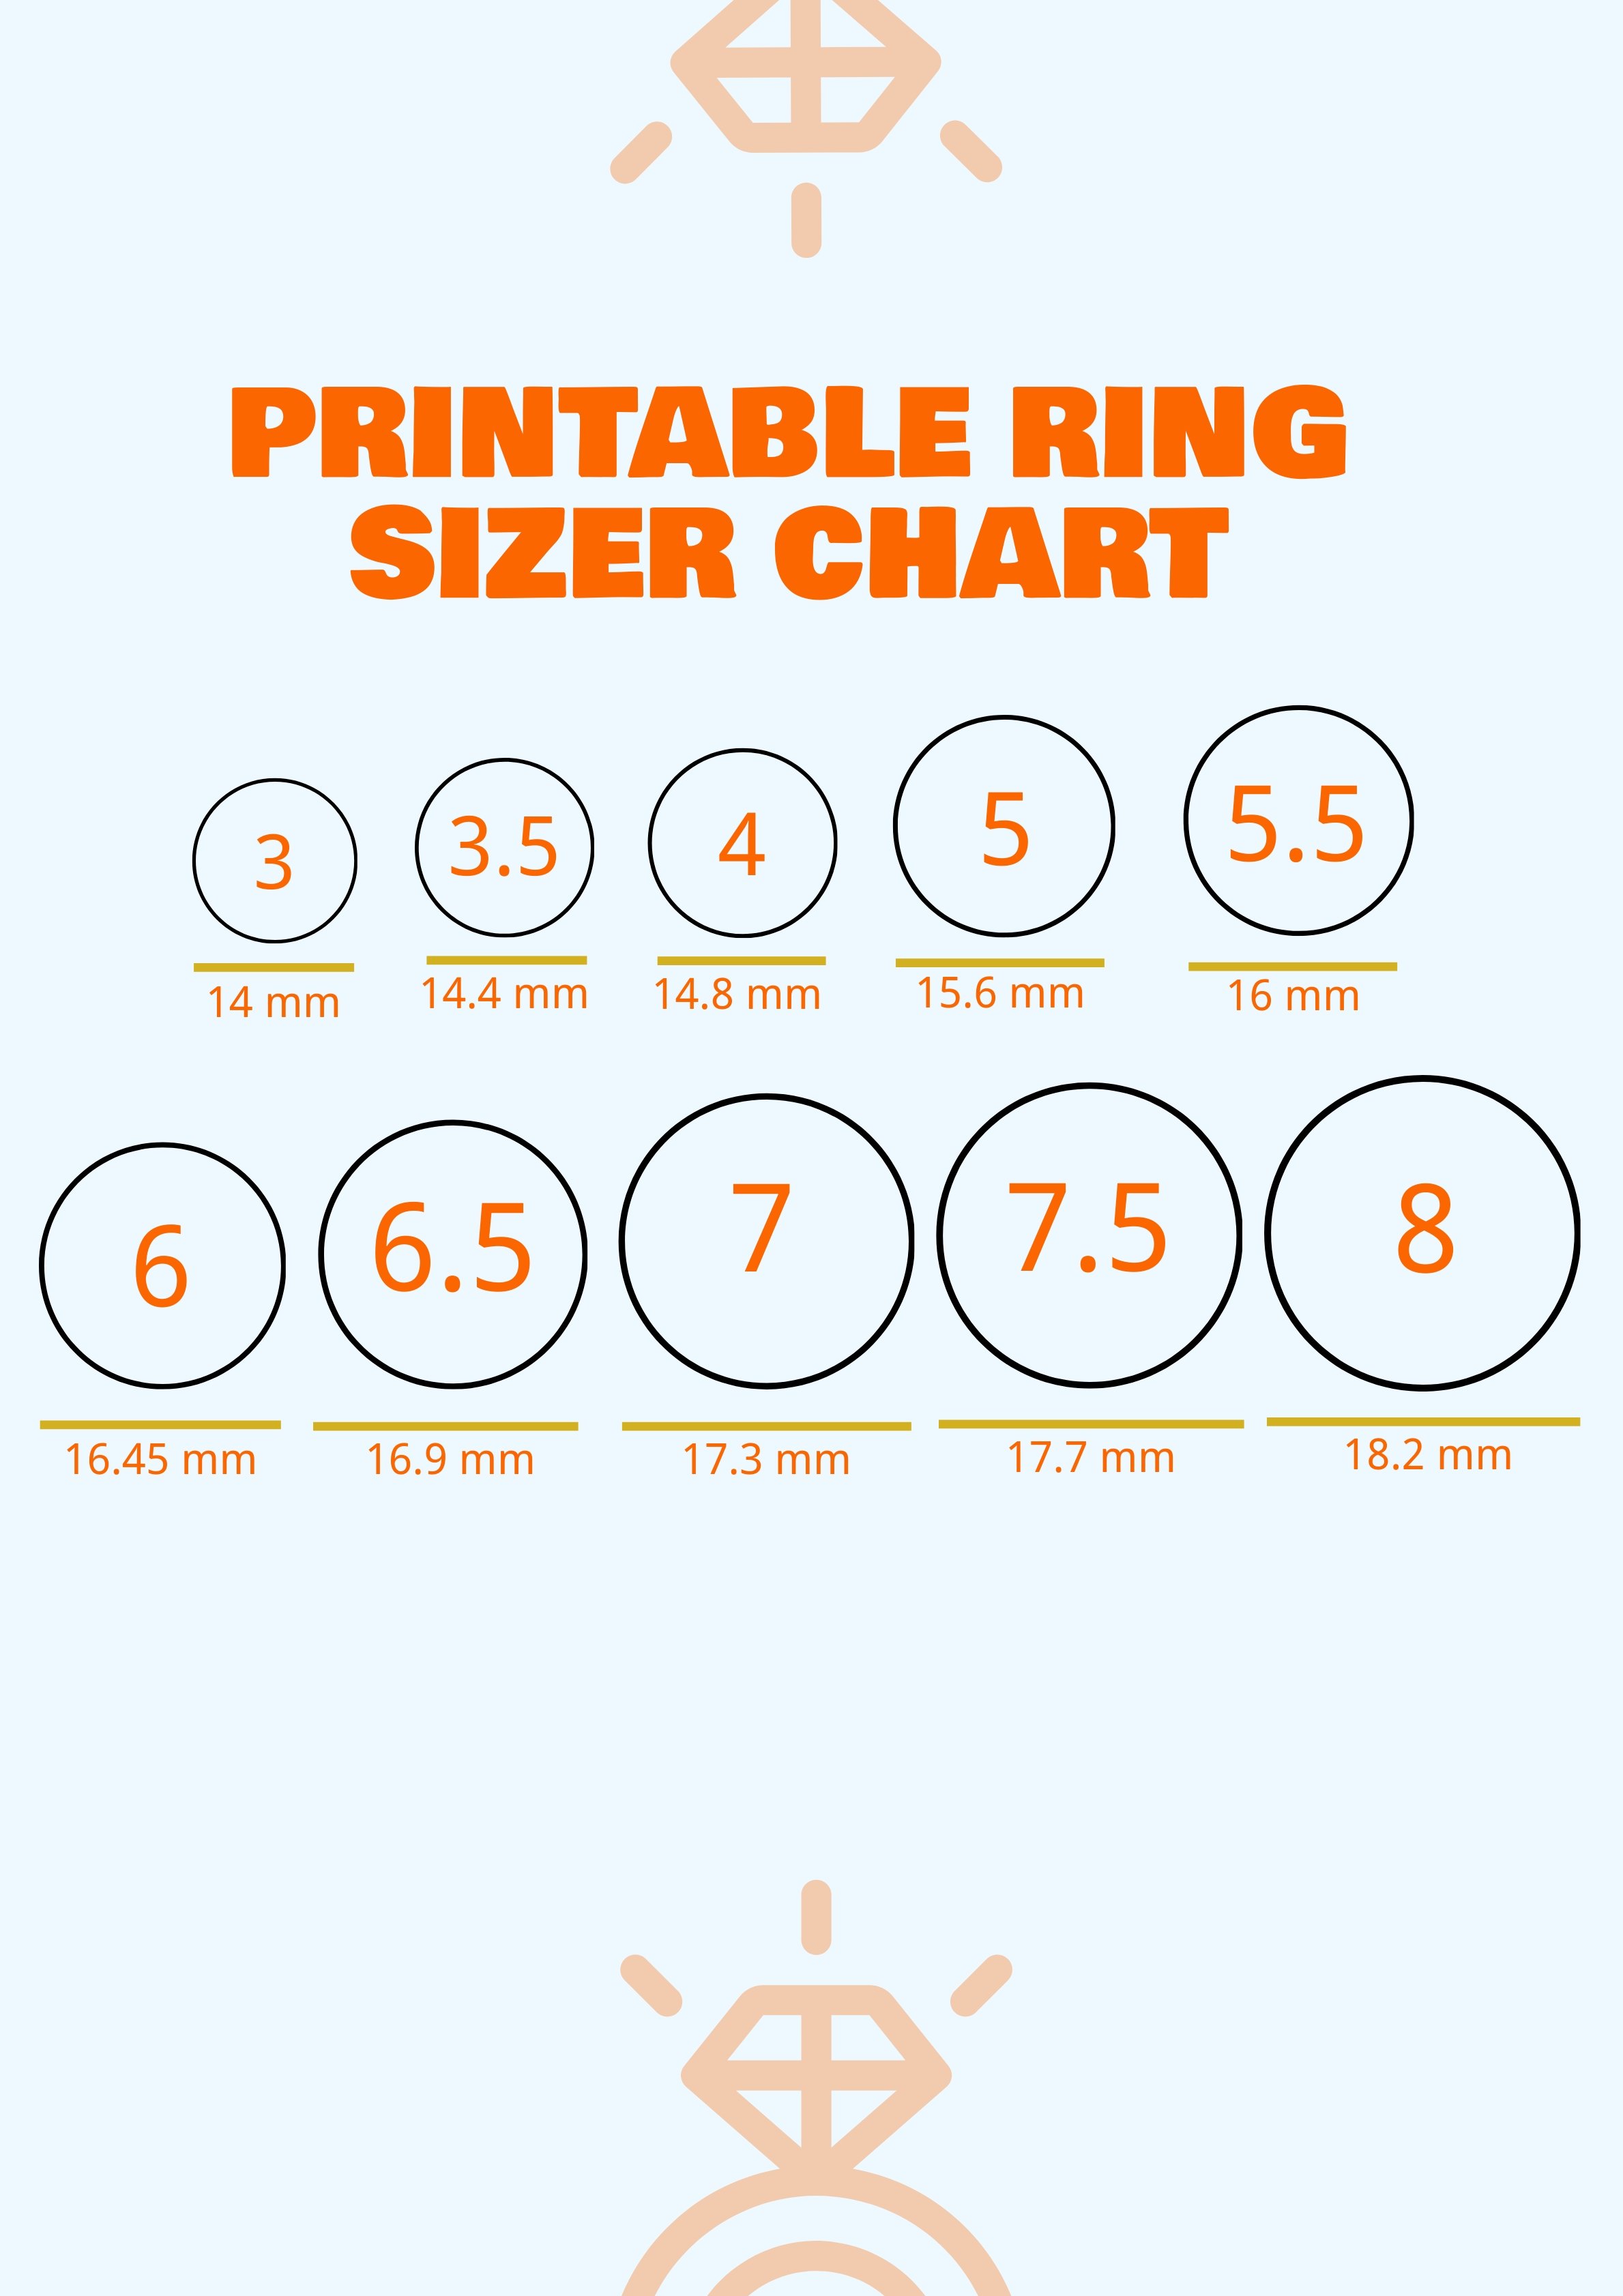 FREE PRINTABLE RING FINGER SIZE CHART